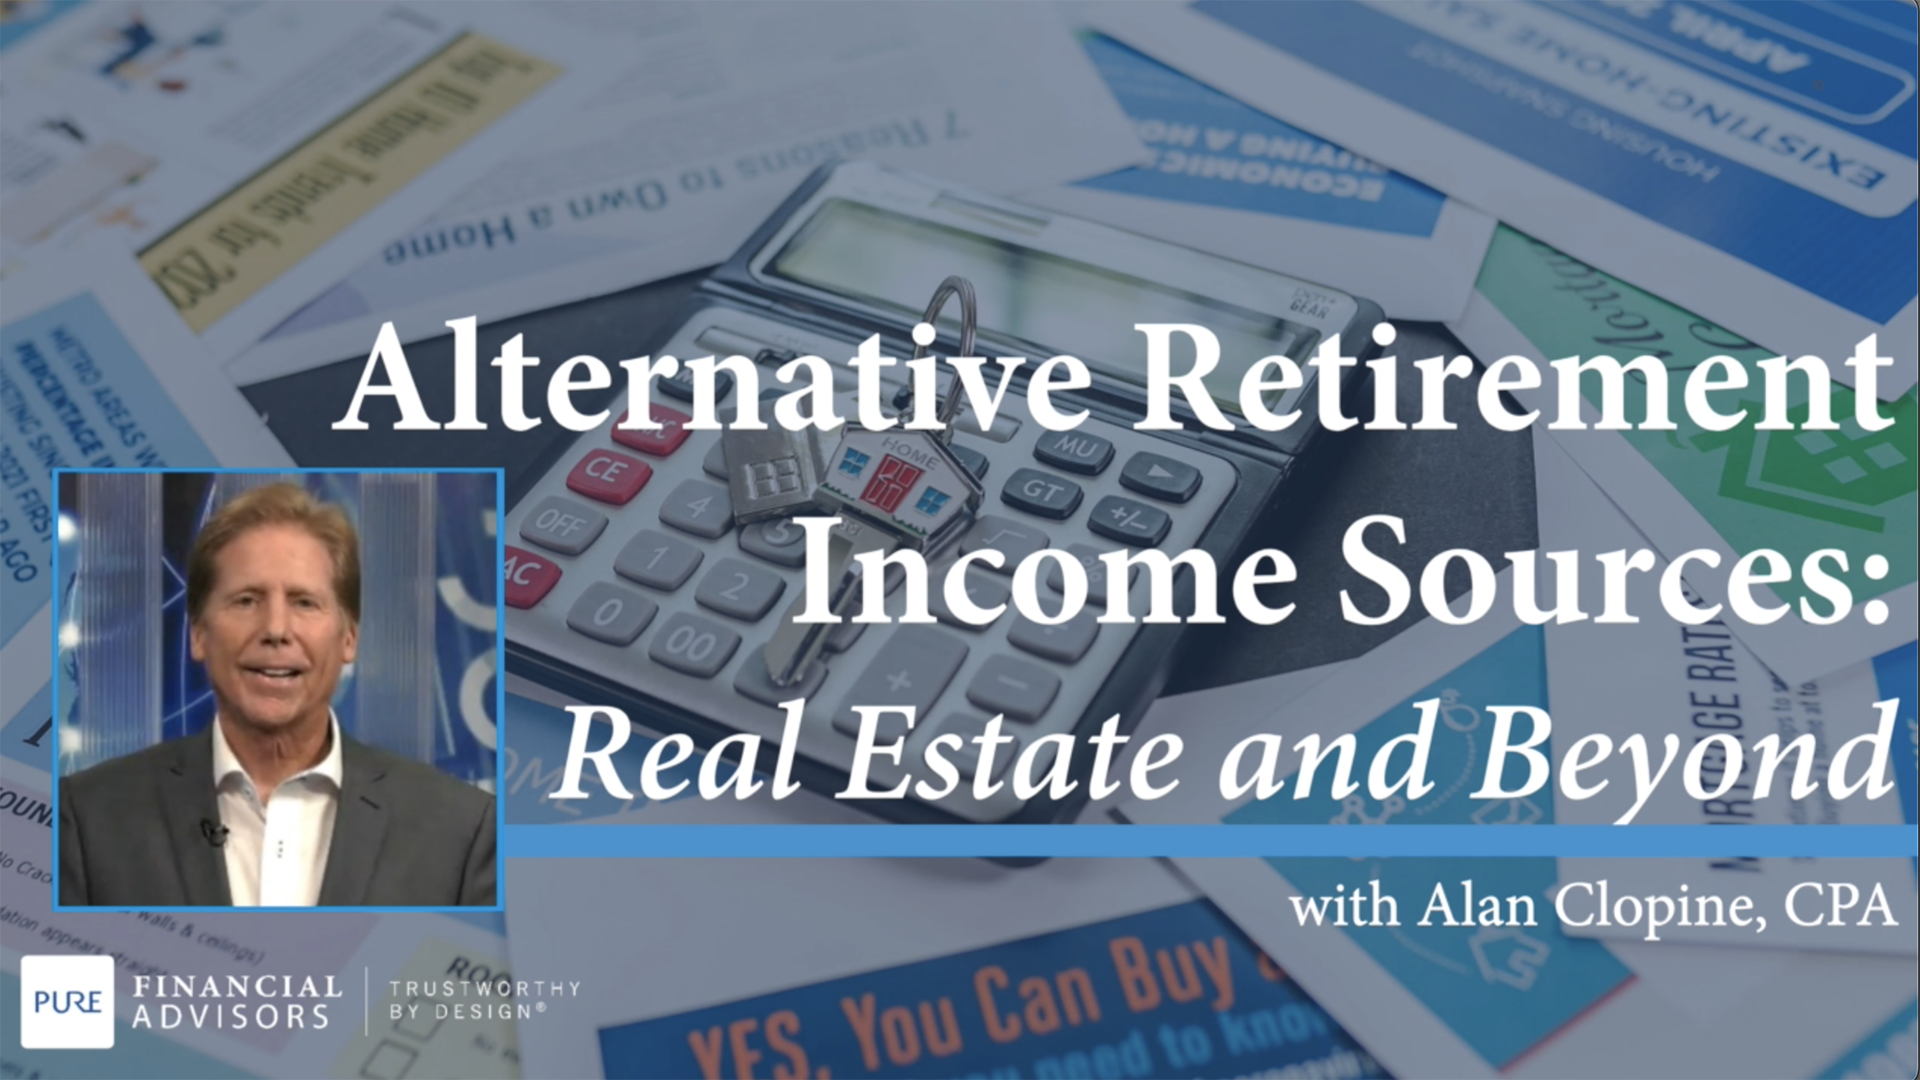 Alternative Retirement Income Sources: Real Estate and Beyond